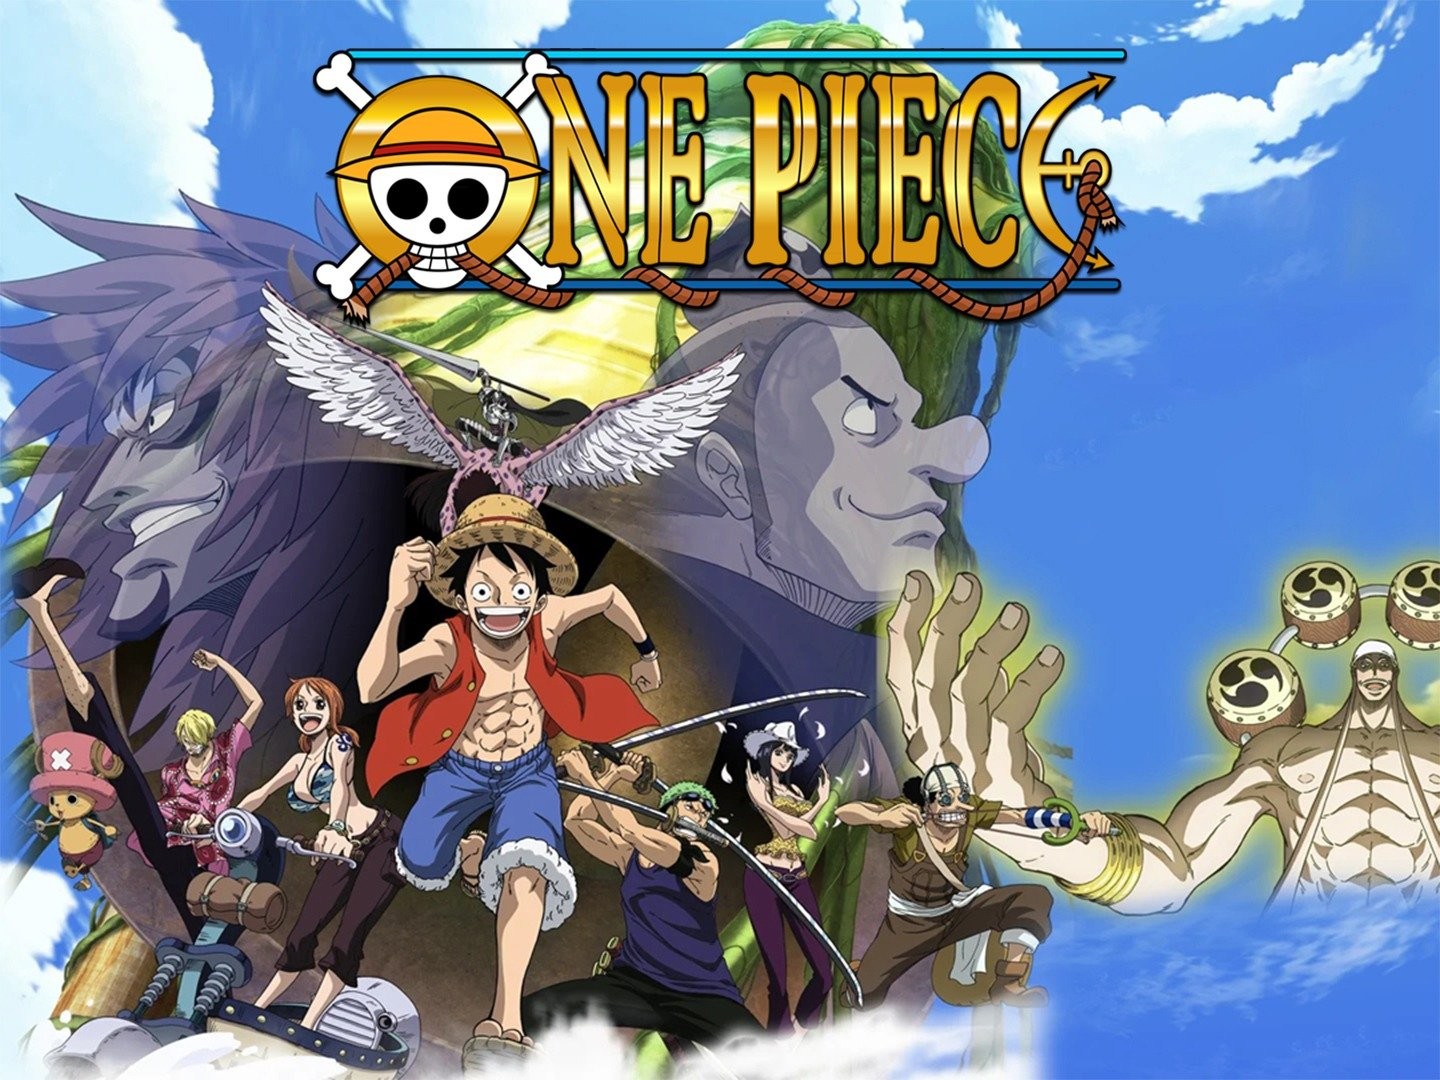 Toei Animation - Bon voyage! More episodes of One Piece (eps. 131-195),  including the Sky Island arc, are now streaming on Netflix! 👀🏴‍☠️👋